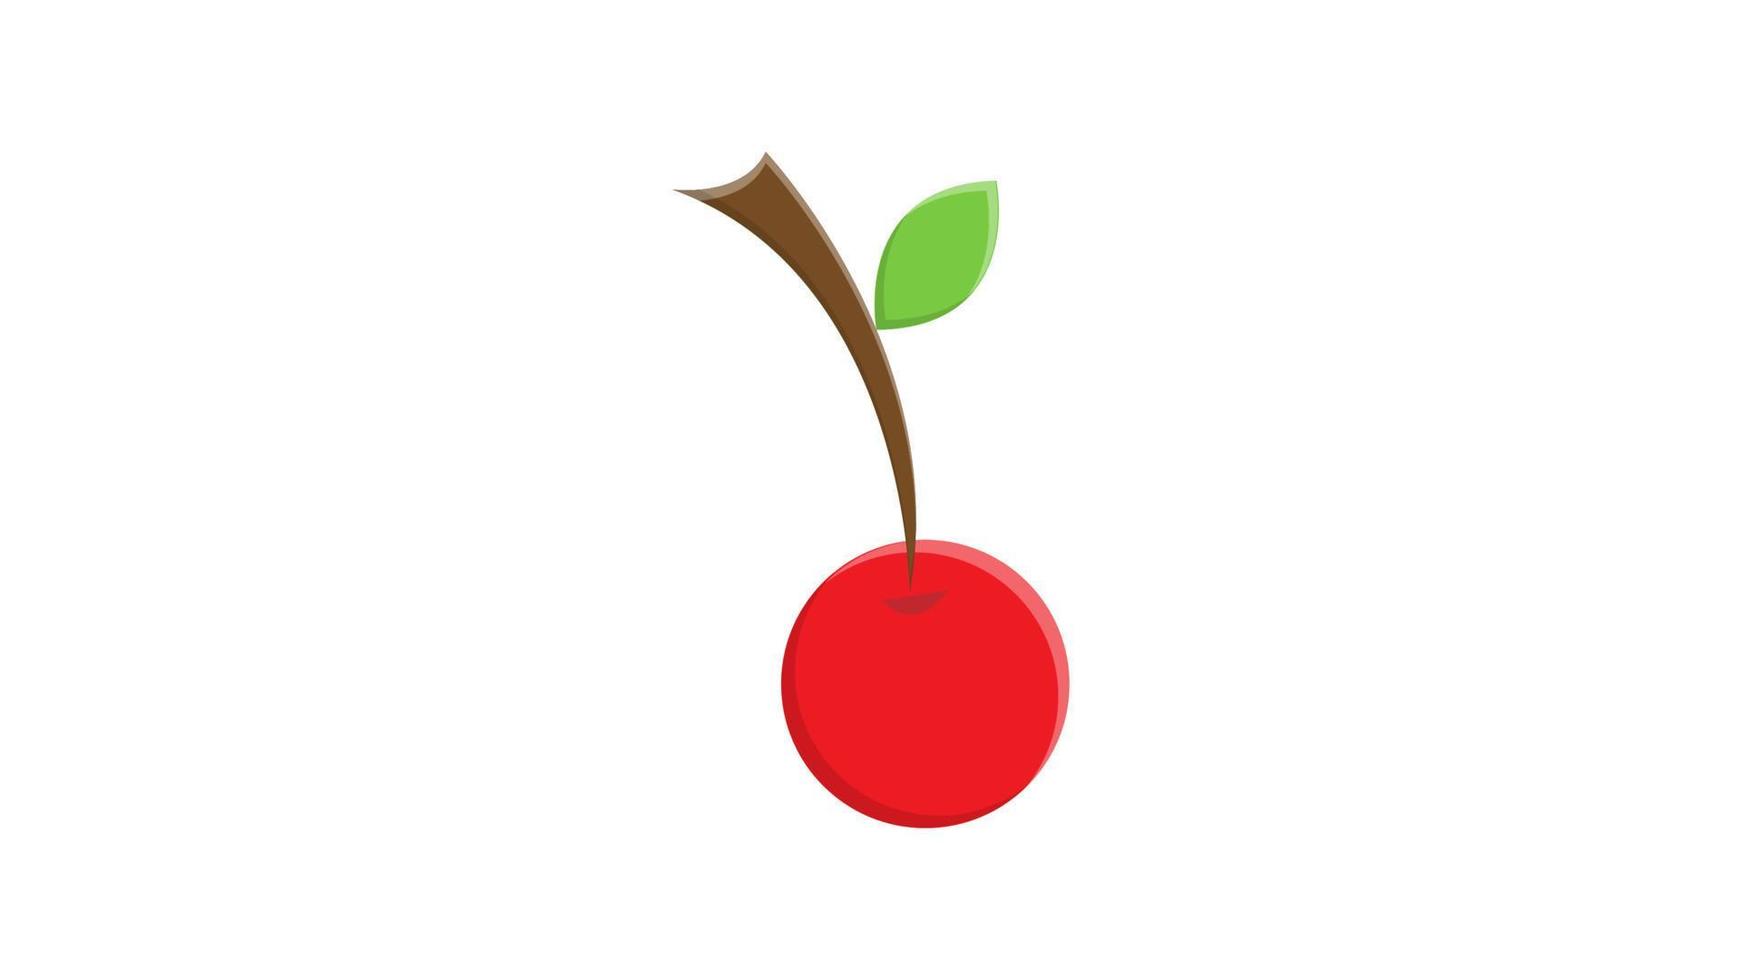 Juicy, ripe on a branch with a leaf cherry - fresh fruit, natural berry. Vector illustration